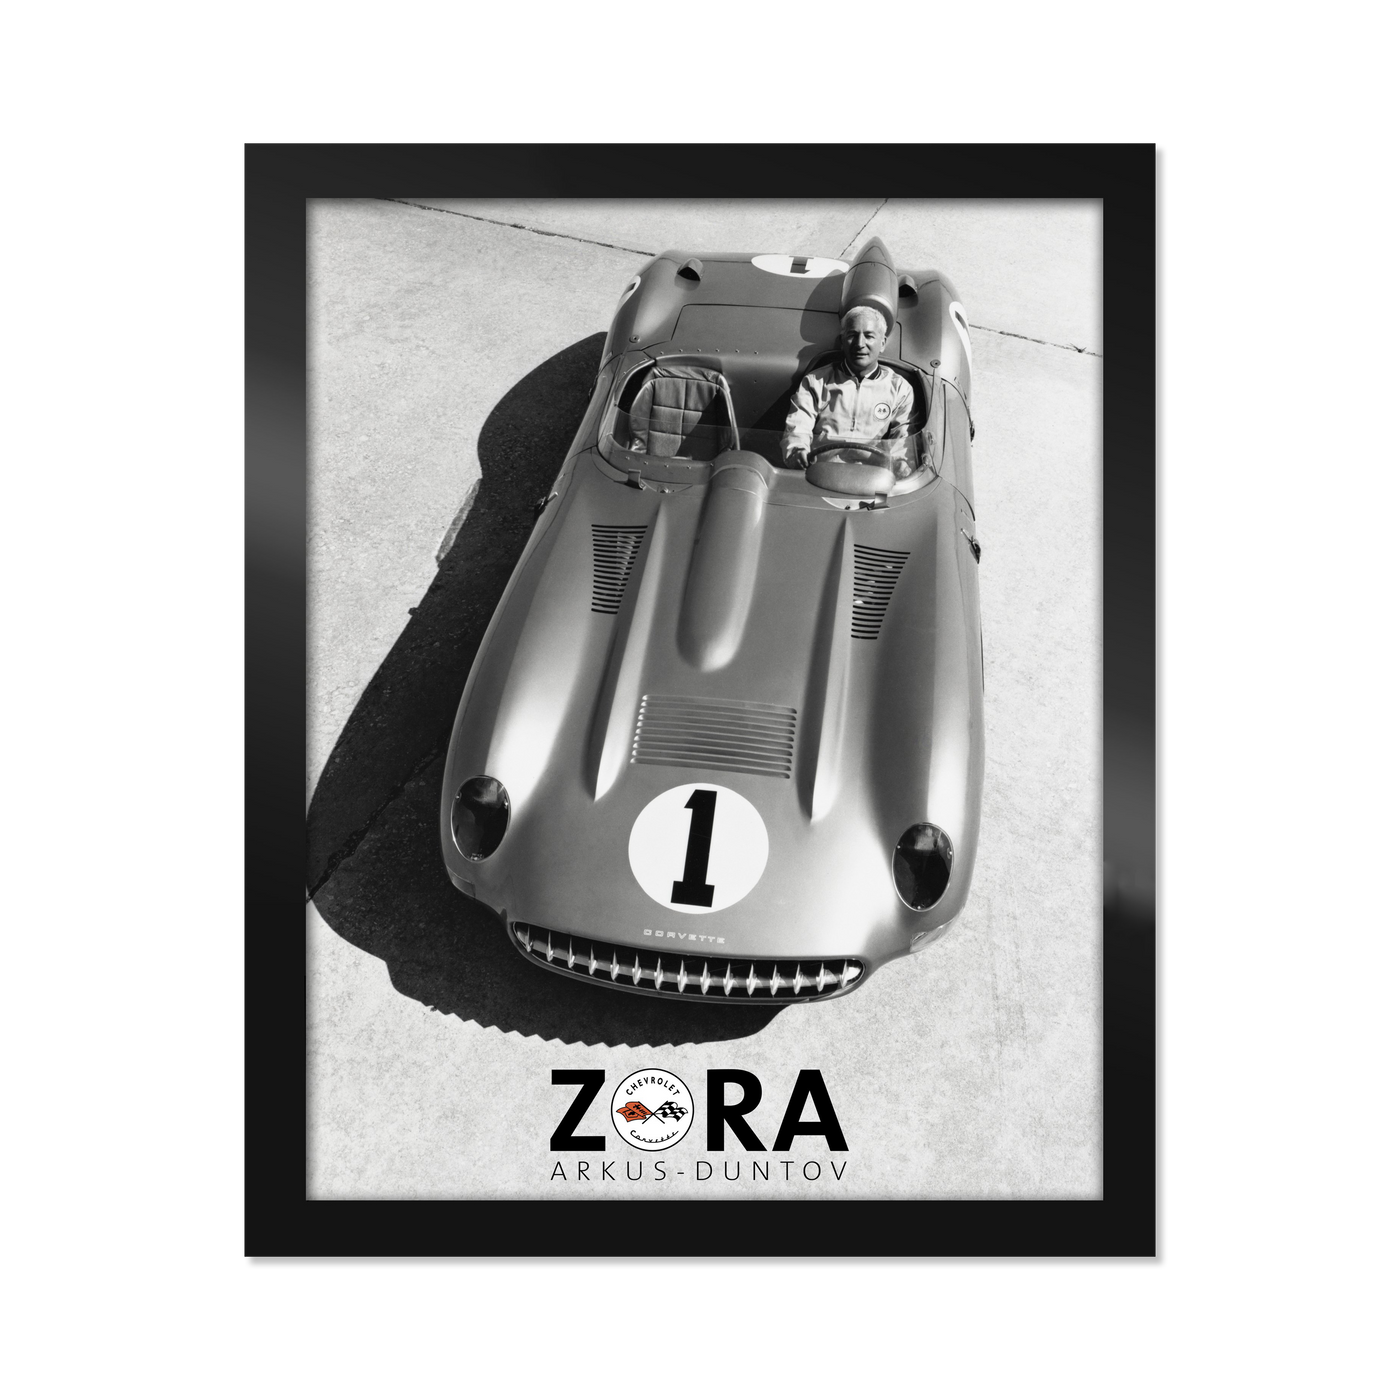 Zora "Father Of The Corvette" Framed Printed Canvas Art